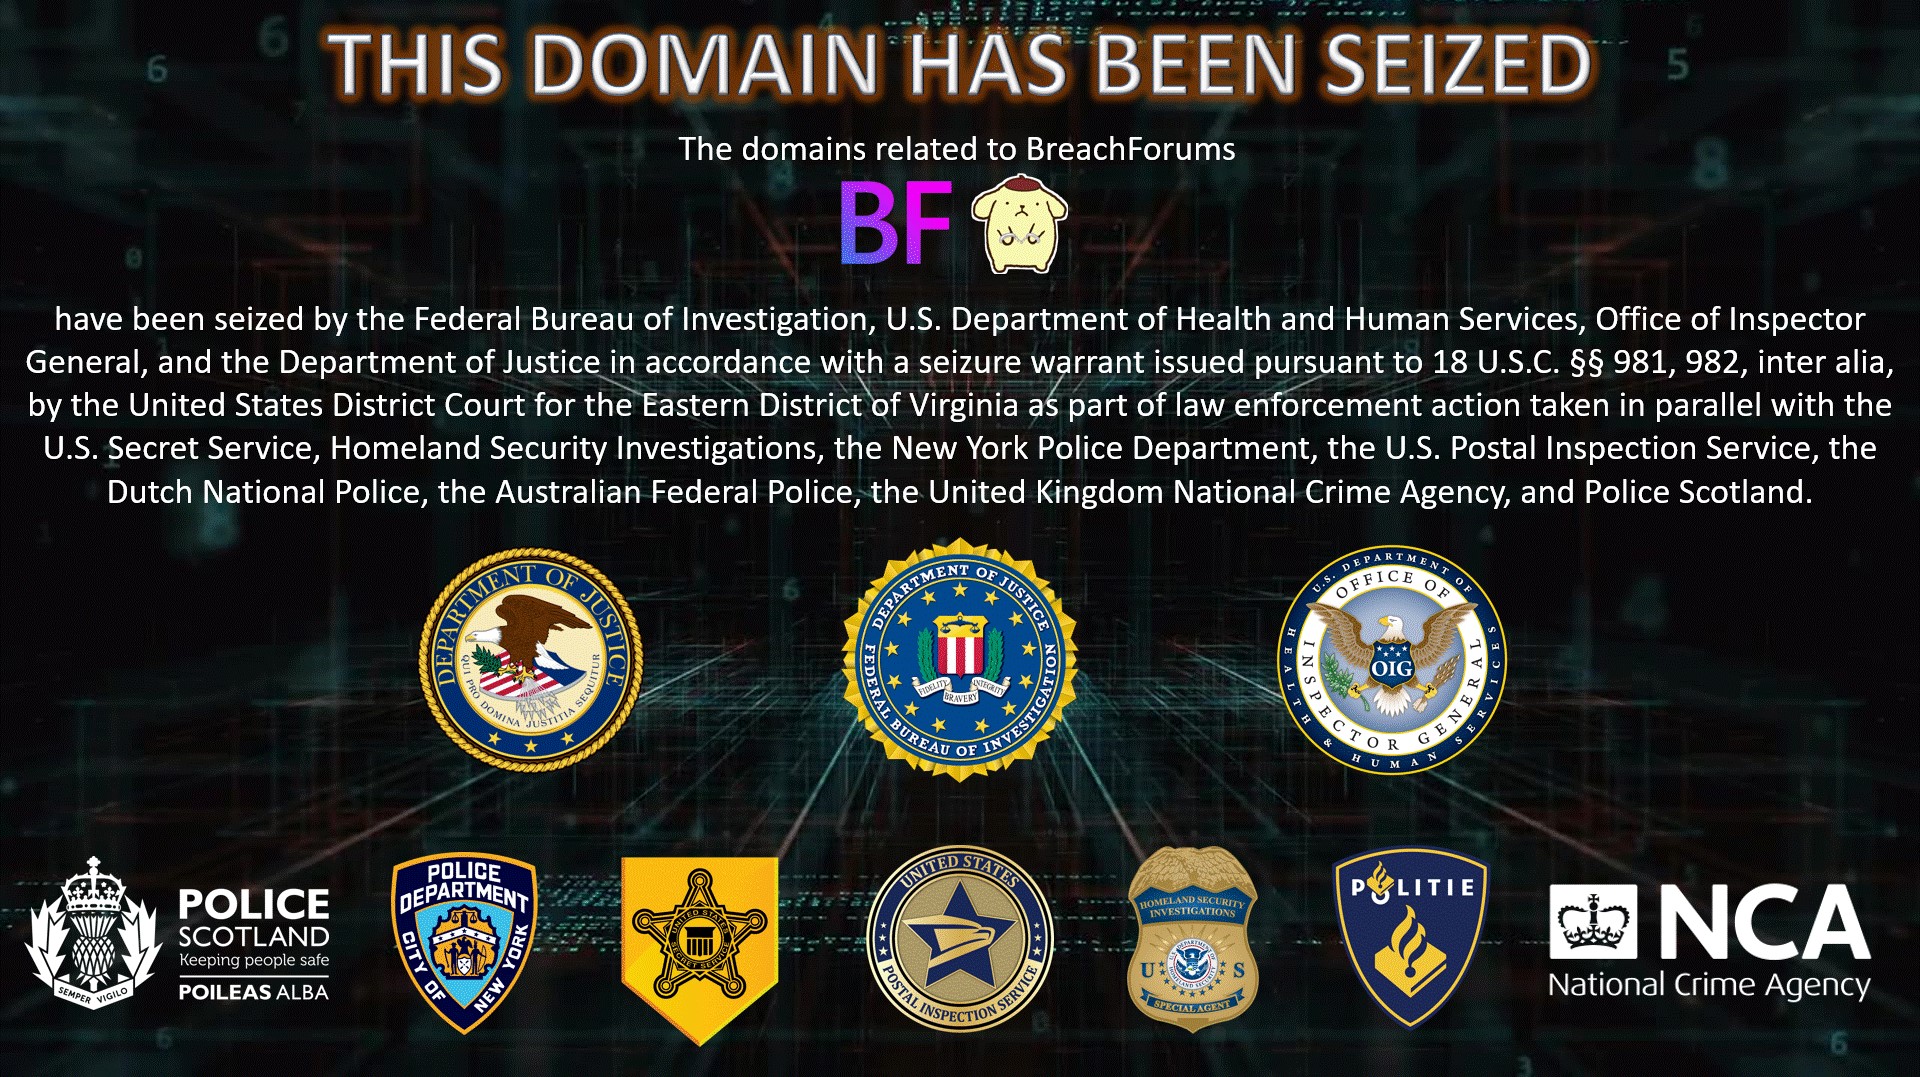 The domains related to BreachForums have been seized by the Federal Bureau of Investigation, U.S. Department of Health and Human Services, Office of Inspector General, and the Department of Justice in accordance with a seizure warrant issued pursuant to 18 U.S.C. Â§Â§ 981, 982, inter alia, by the United States District Court for the Eastern District of Virginia as part of law enforcement action taken in parallel with the United States Secret Service, Homeland Security Investigations, the New York Police Department, the U.S. Postal Inspection Service, the Dutch National Police, the Australian Federal Police, the United Kingdom National Crime Agency, and Police Scotland.